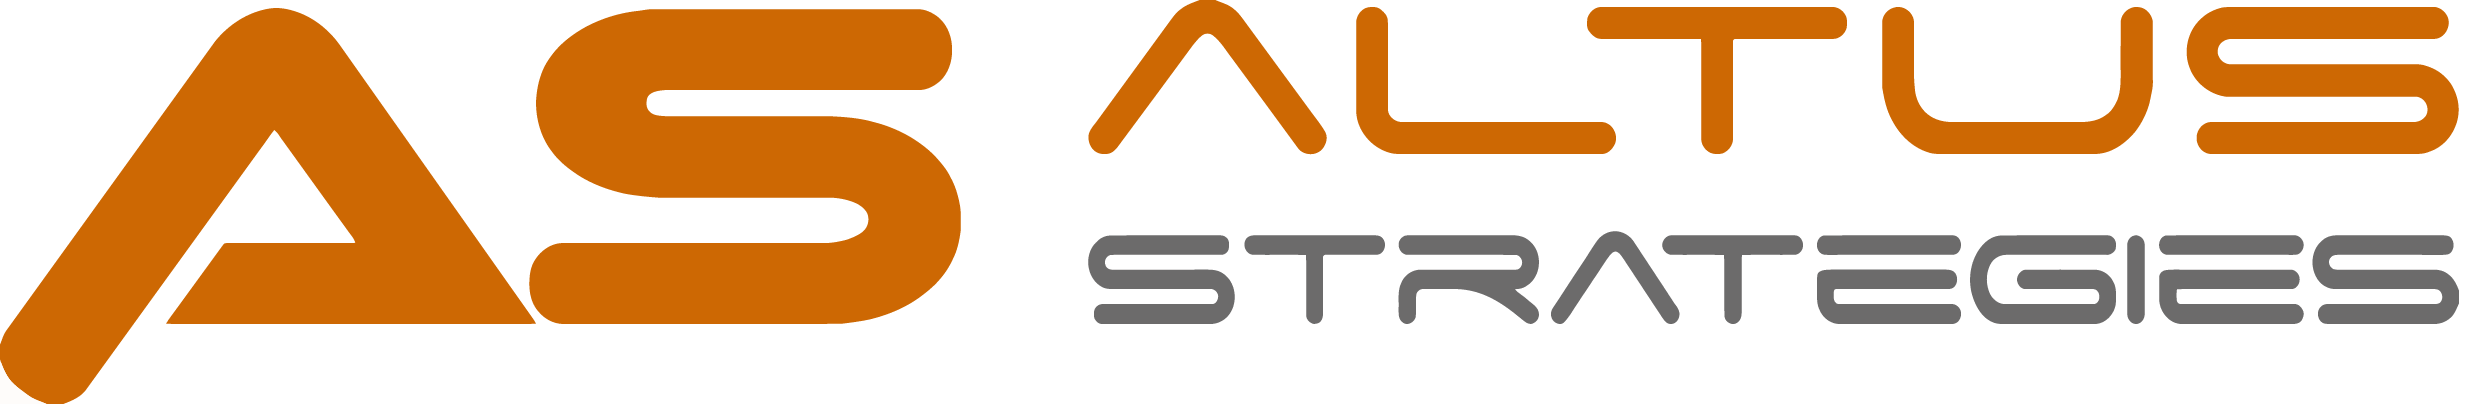 Altus Strategies Plc, Wednesday, March 10, 2021, Press release picture